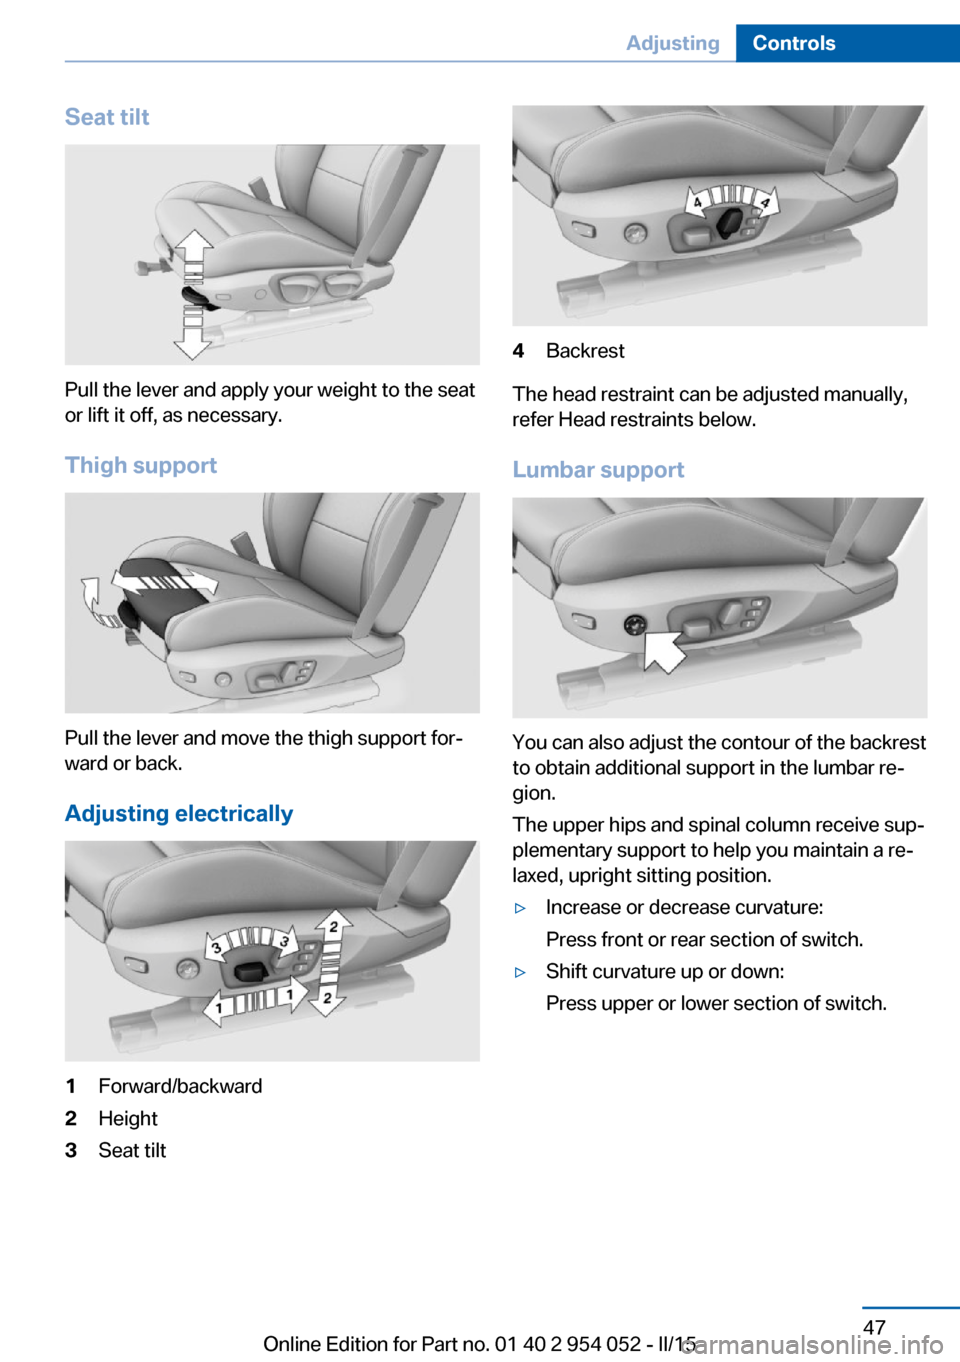 BMW X1 2015 E84 Service Manual Seat tilt
Pull the lever and apply your weight to the seat
or lift it off, as necessary.
Thigh support
Pull the lever and move the thigh support for‐
ward or back.
Adjusting electrically
1Forward/ba